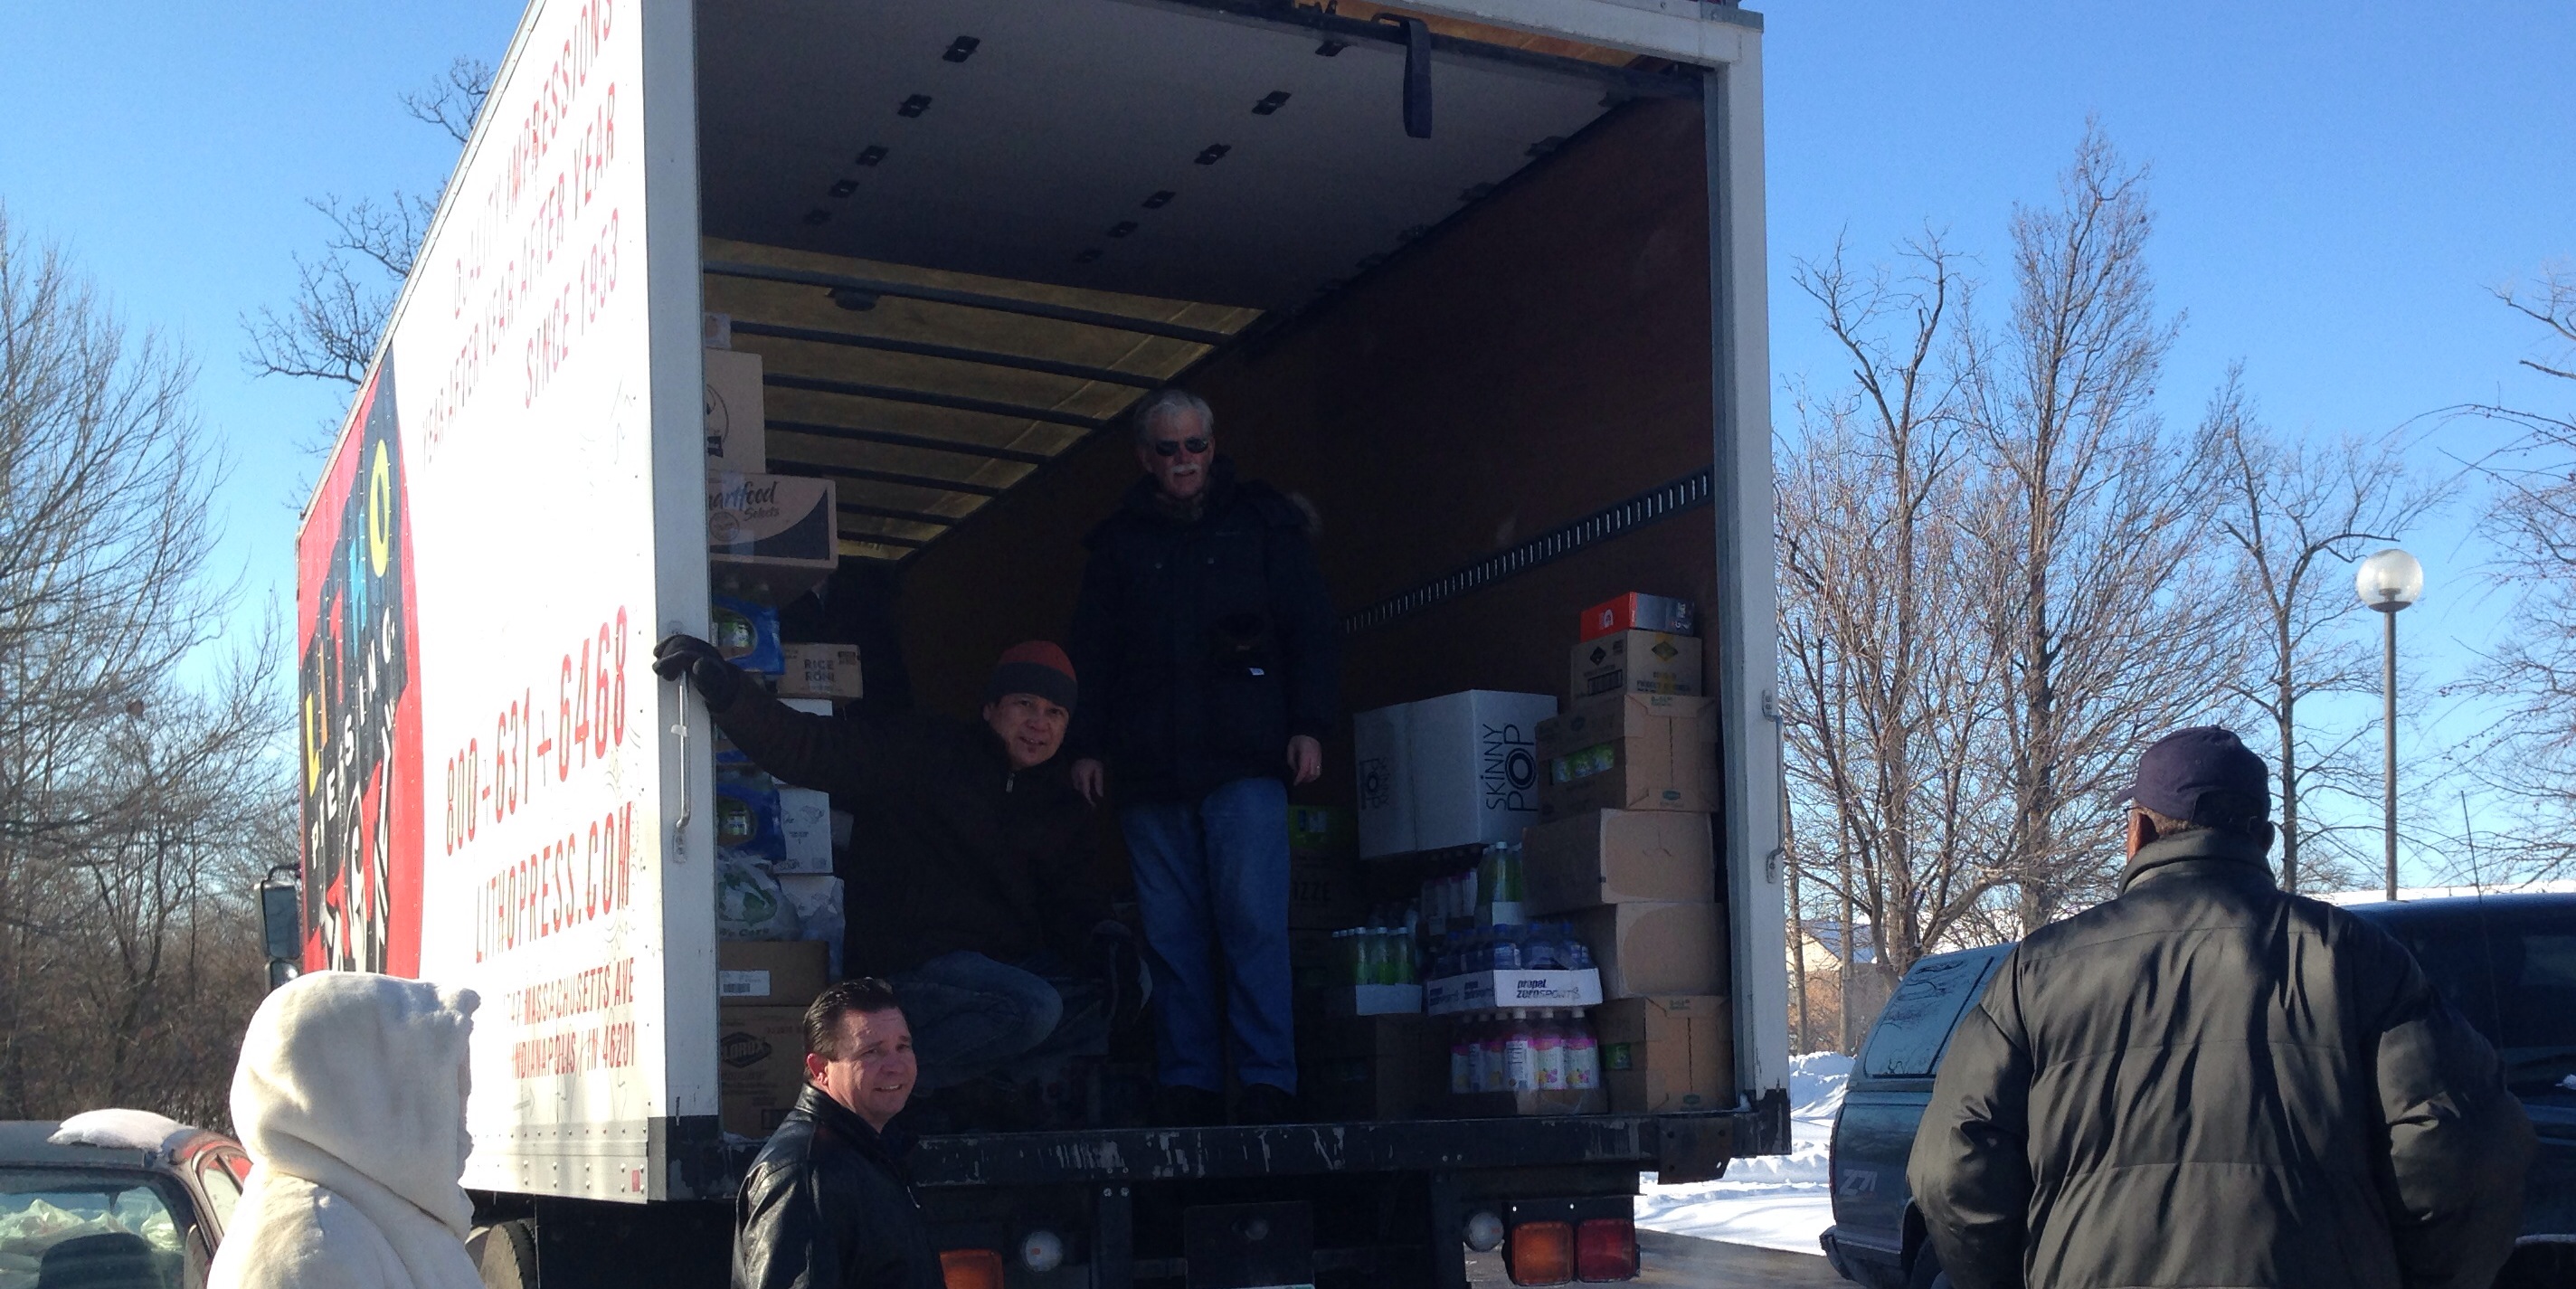 The extreme cold did not stop the leaders and volunteers to address hunger.